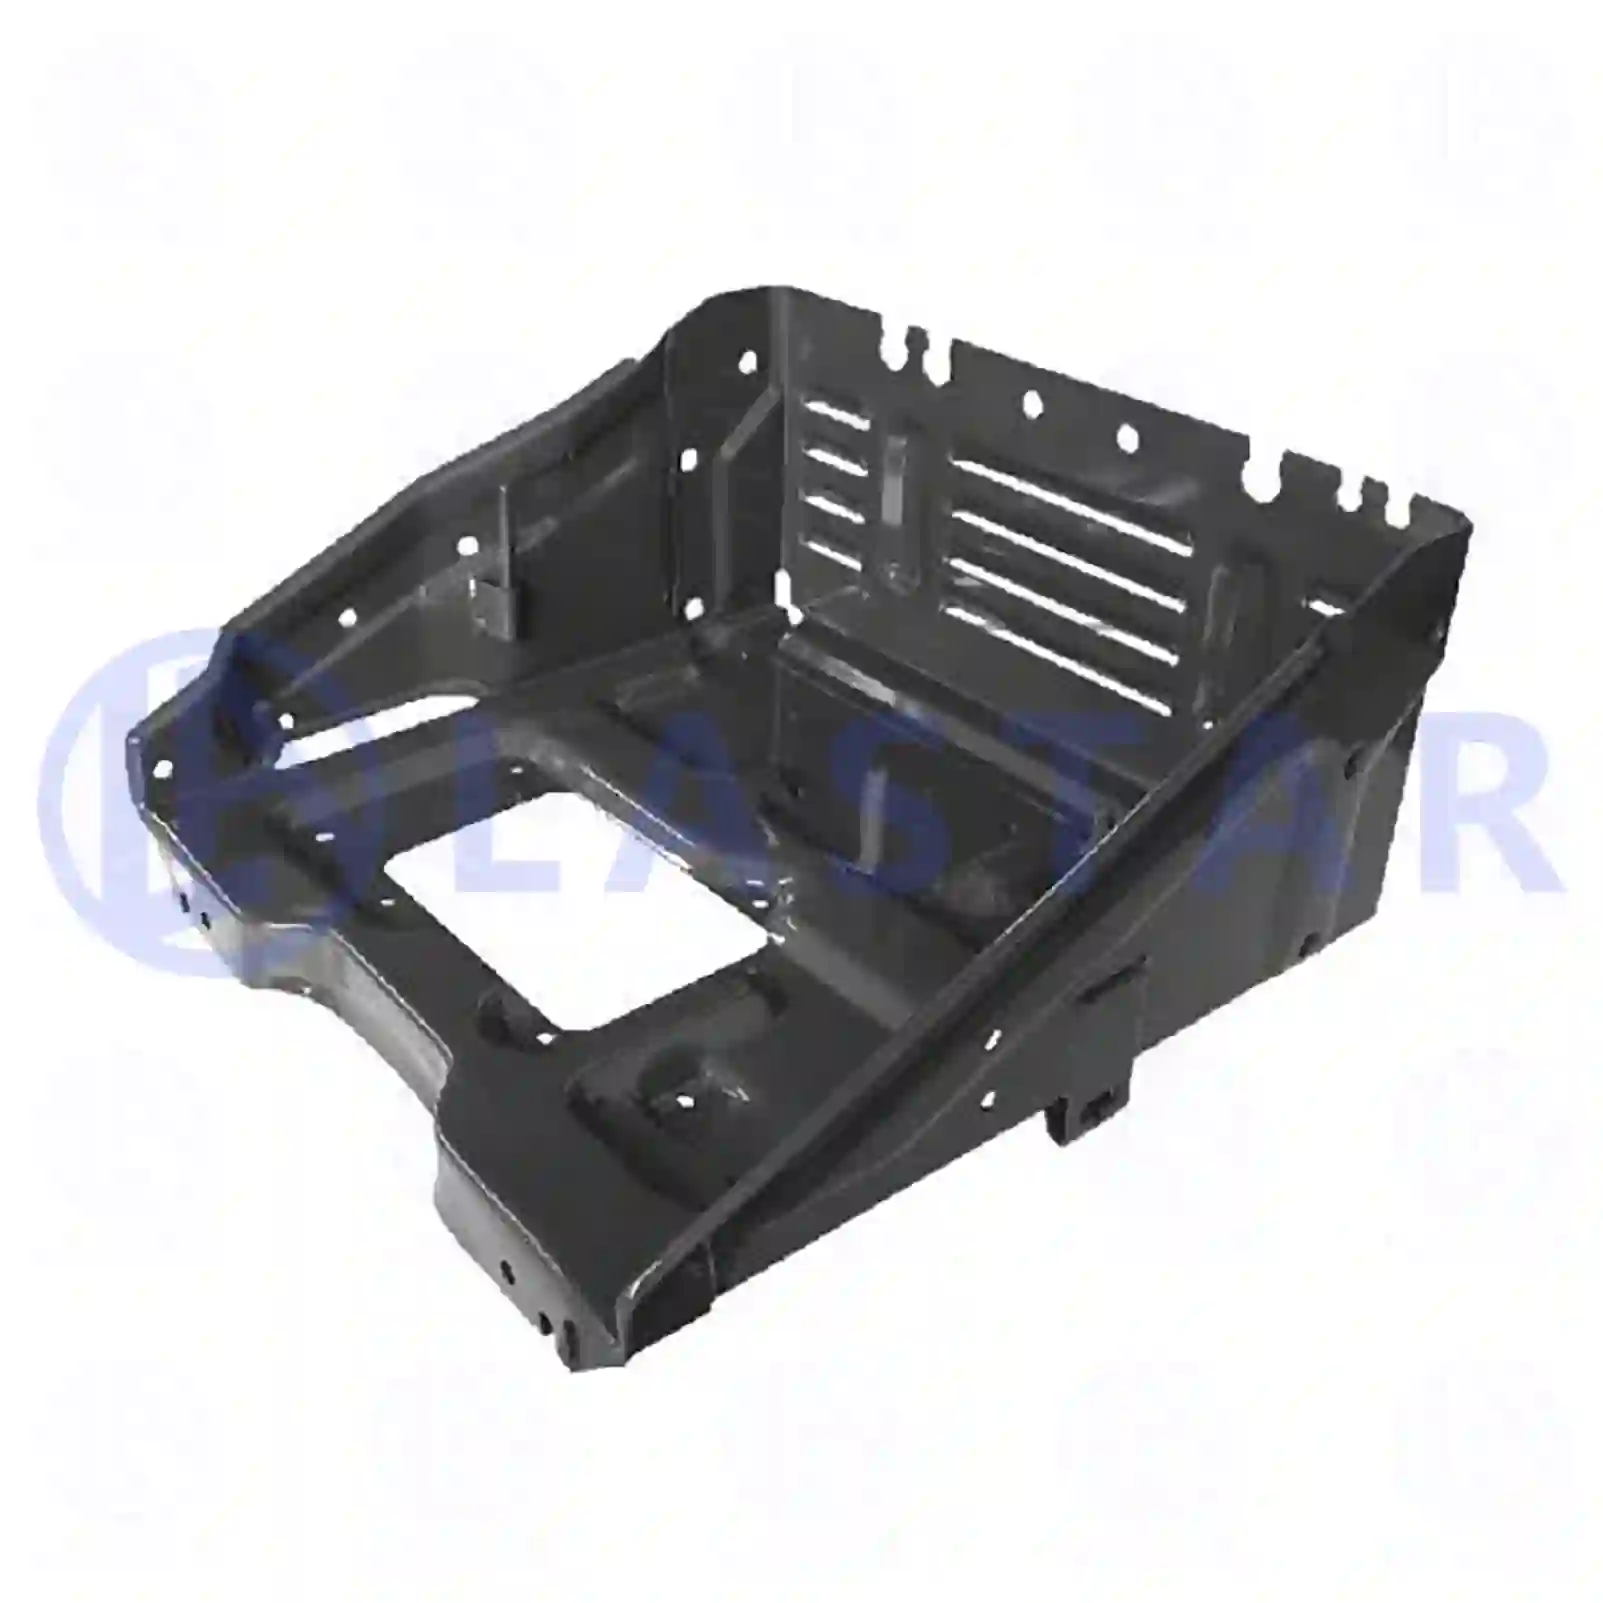 Battery frame, 77713343, 1485946, ZG60043-0008 ||  77713343 Lastar Spare Part | Truck Spare Parts, Auotomotive Spare Parts Battery frame, 77713343, 1485946, ZG60043-0008 ||  77713343 Lastar Spare Part | Truck Spare Parts, Auotomotive Spare Parts